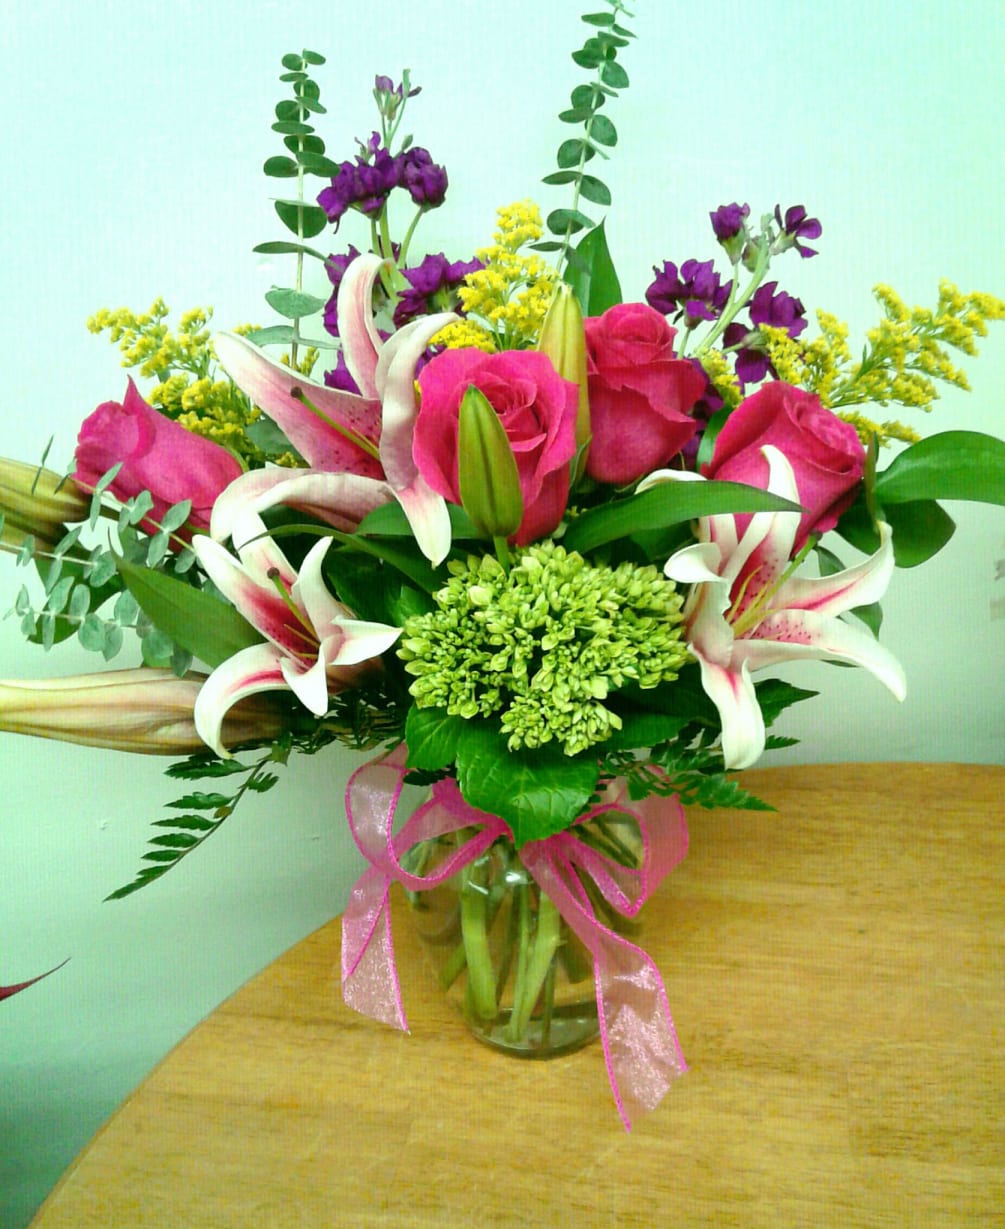 This bright colorful arrangement includes vibrant stargazer lilies, hot pink roses, fragrant